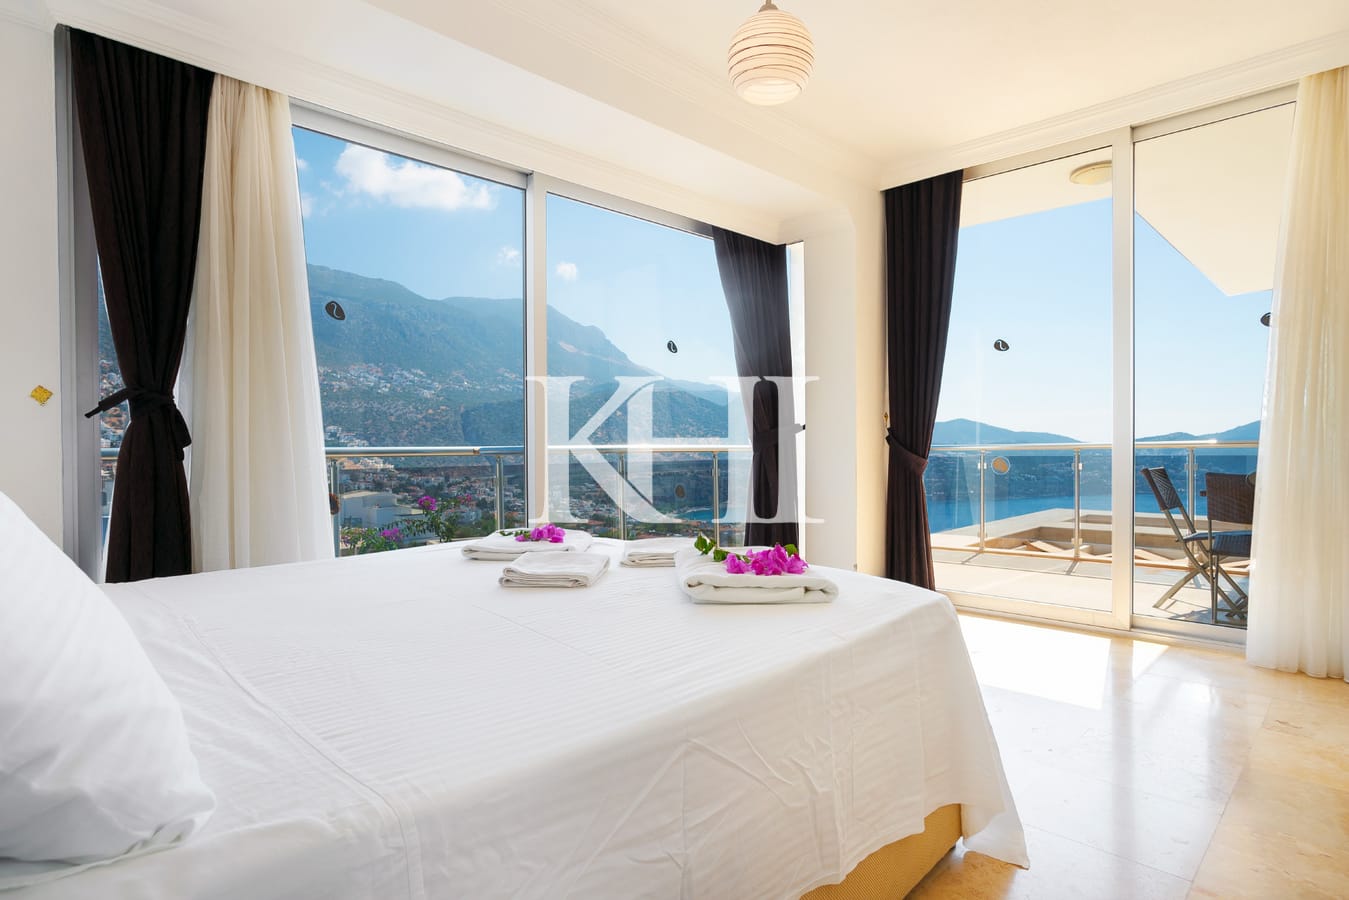 Detached Villa For Sale With Panoramic Kalkan View Slide Image 32